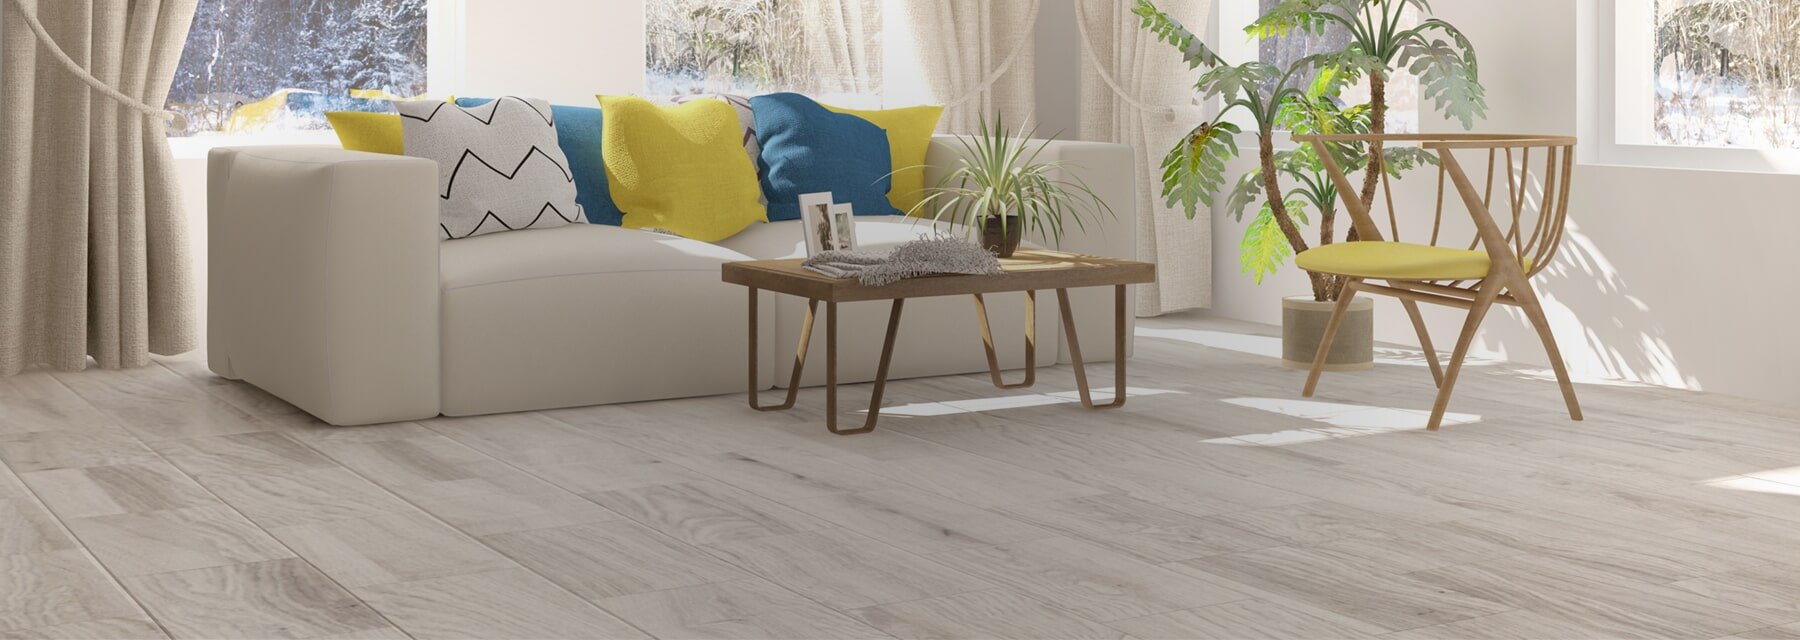 Is it possible to match my décor with waterproof flooring?